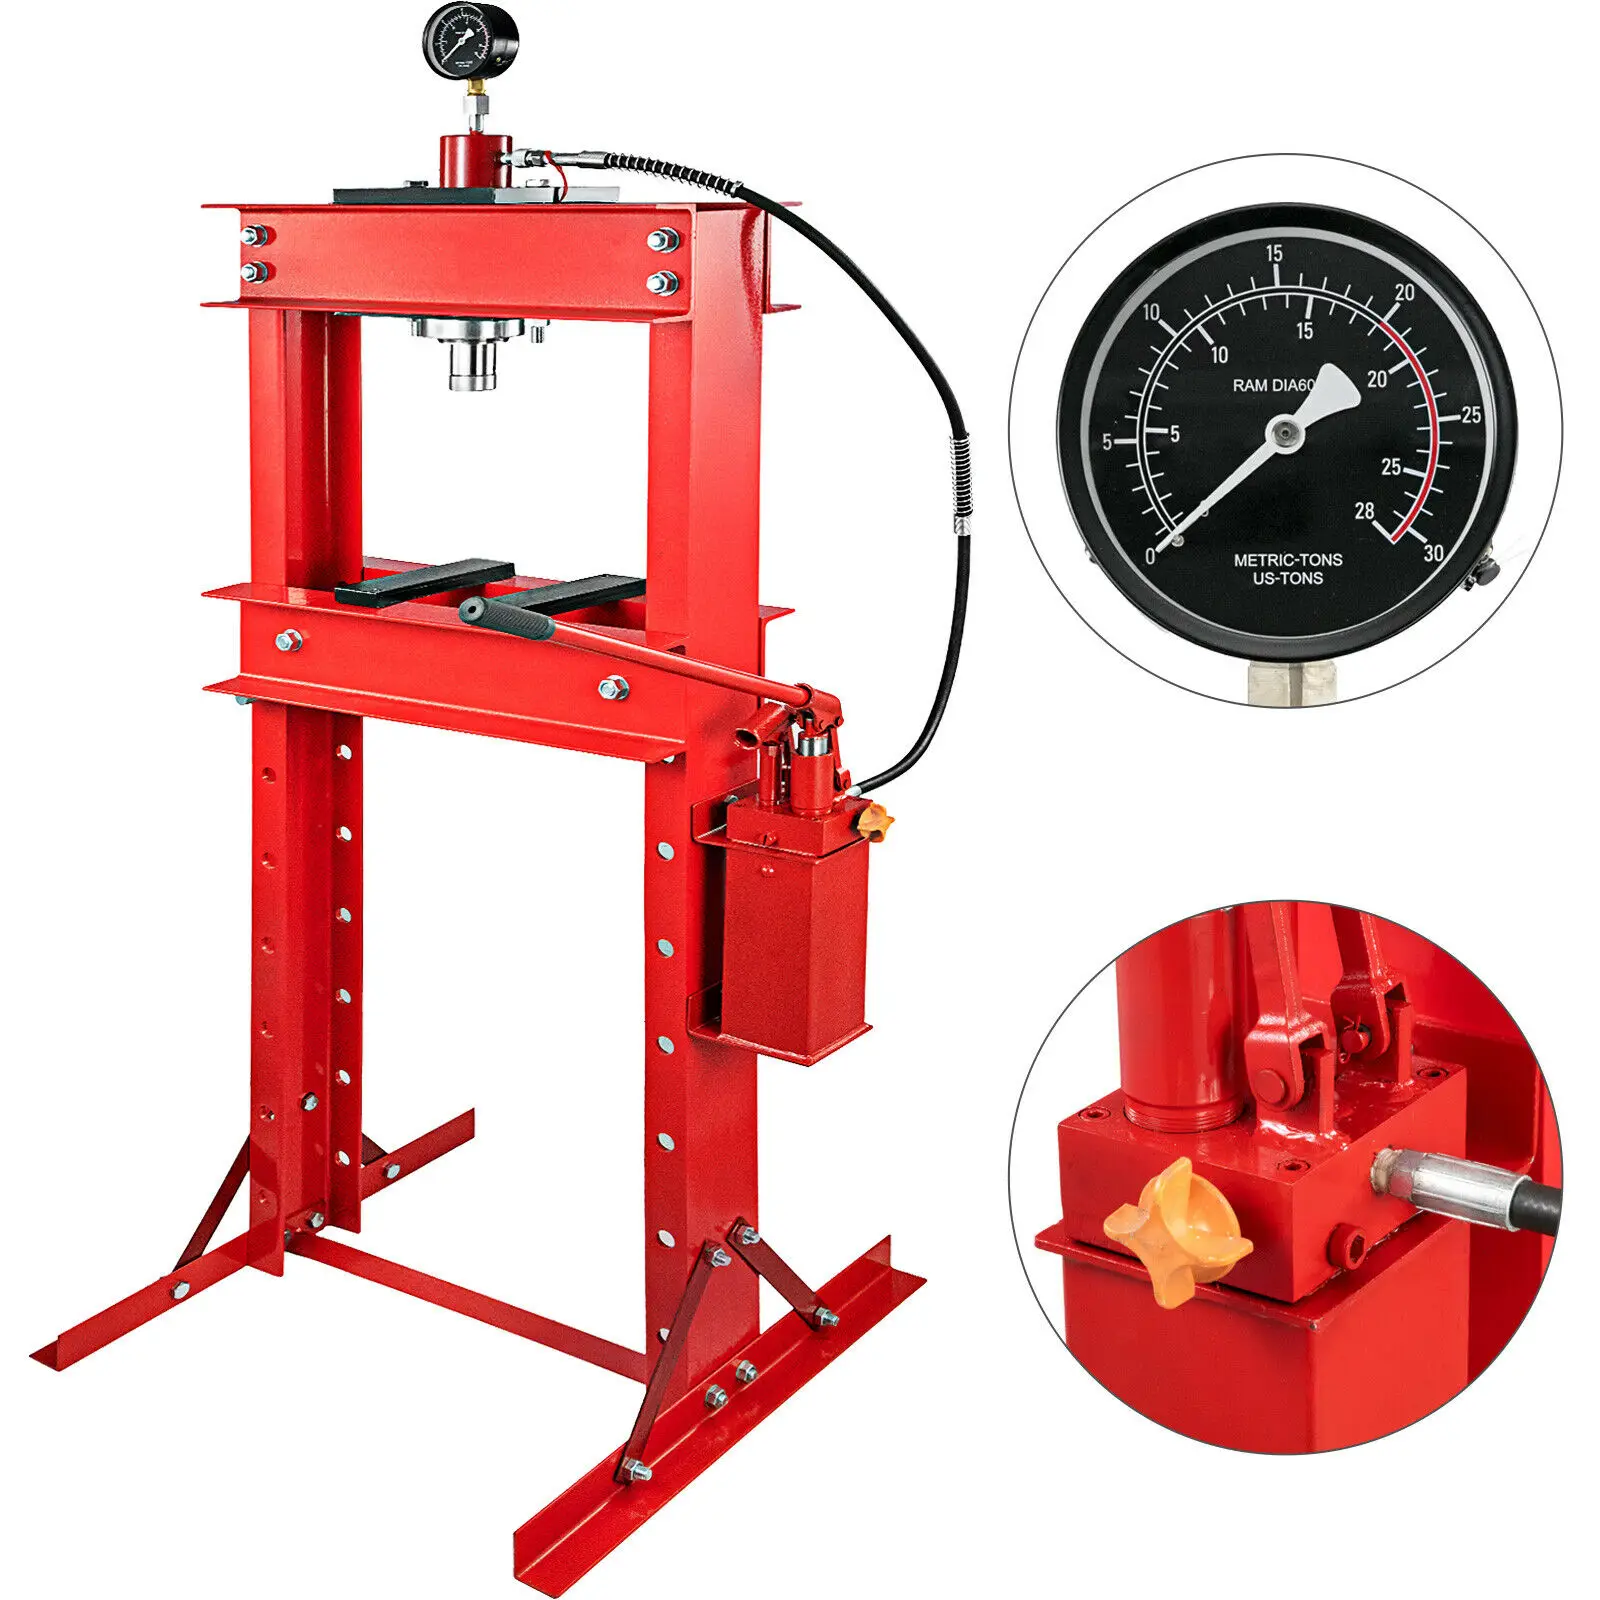 Hydraulic Shop Press Floor Press 30T Heavy Duty with Pump and Manometer